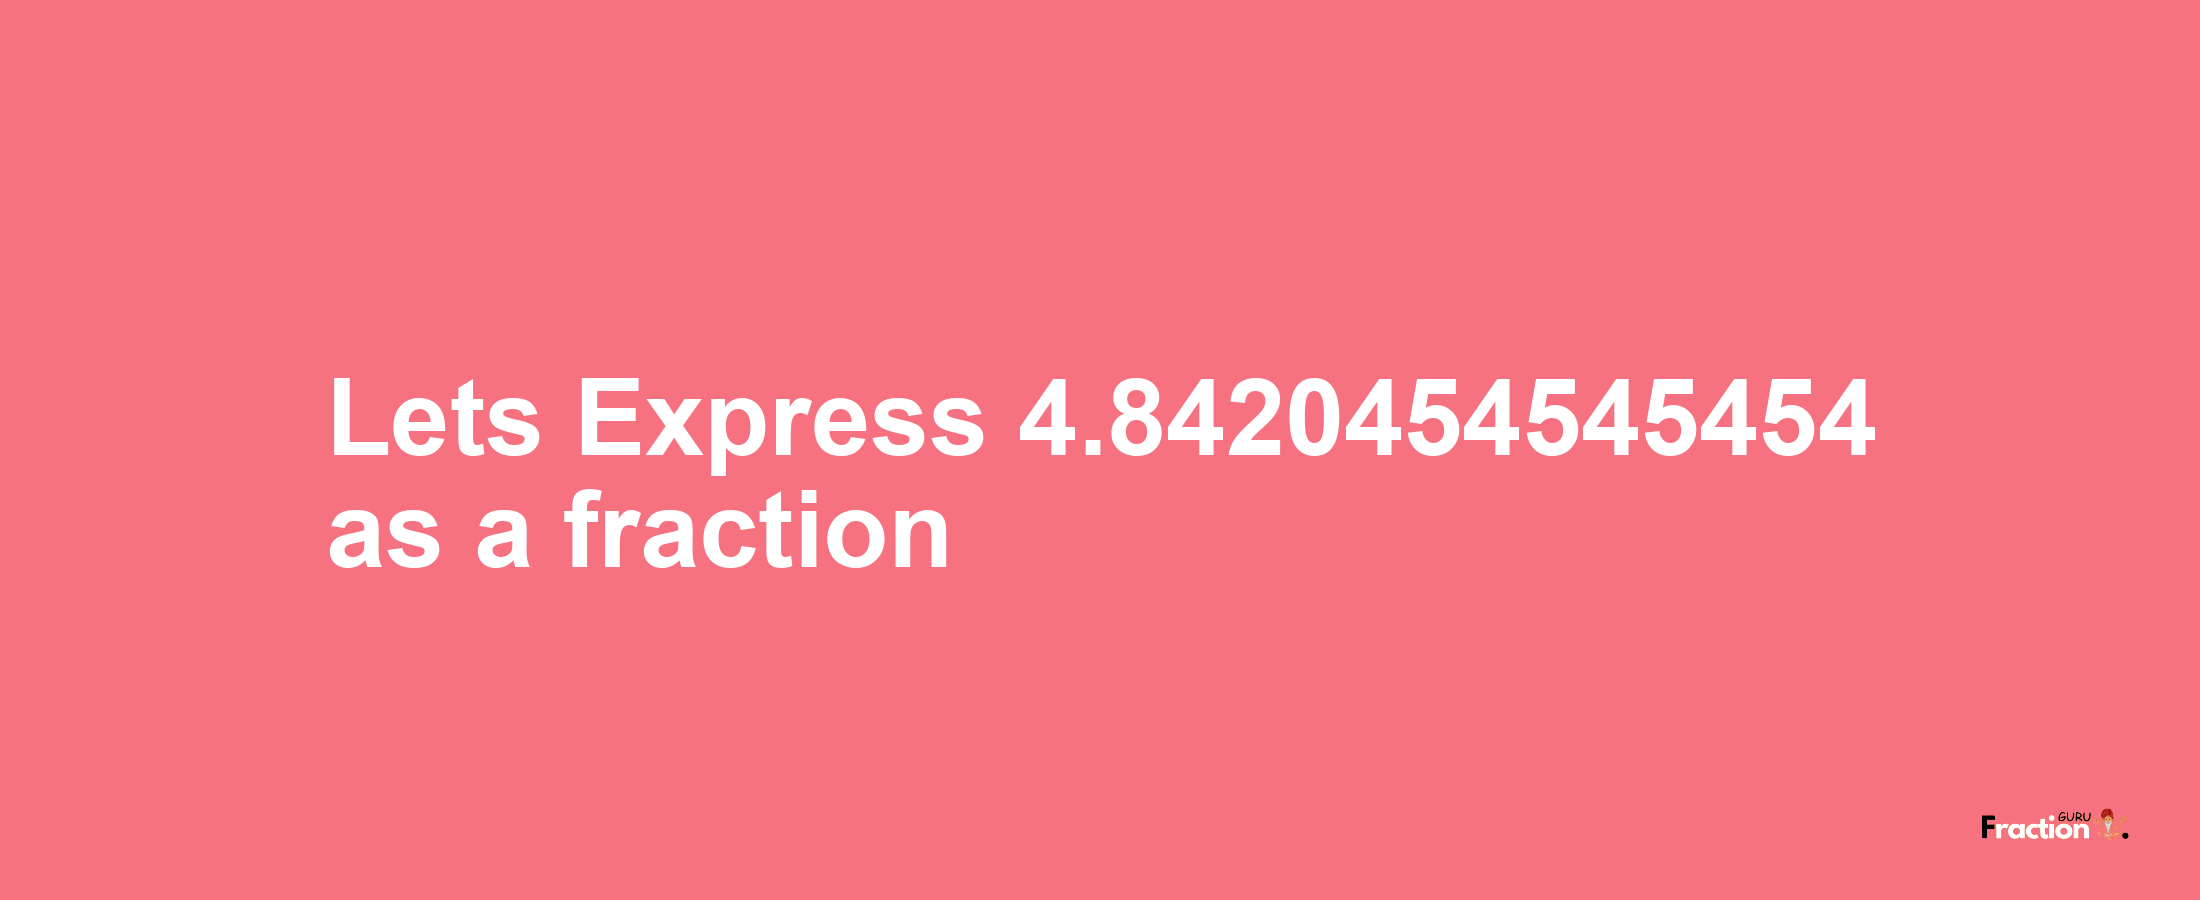 Lets Express 4.8420454545454 as afraction